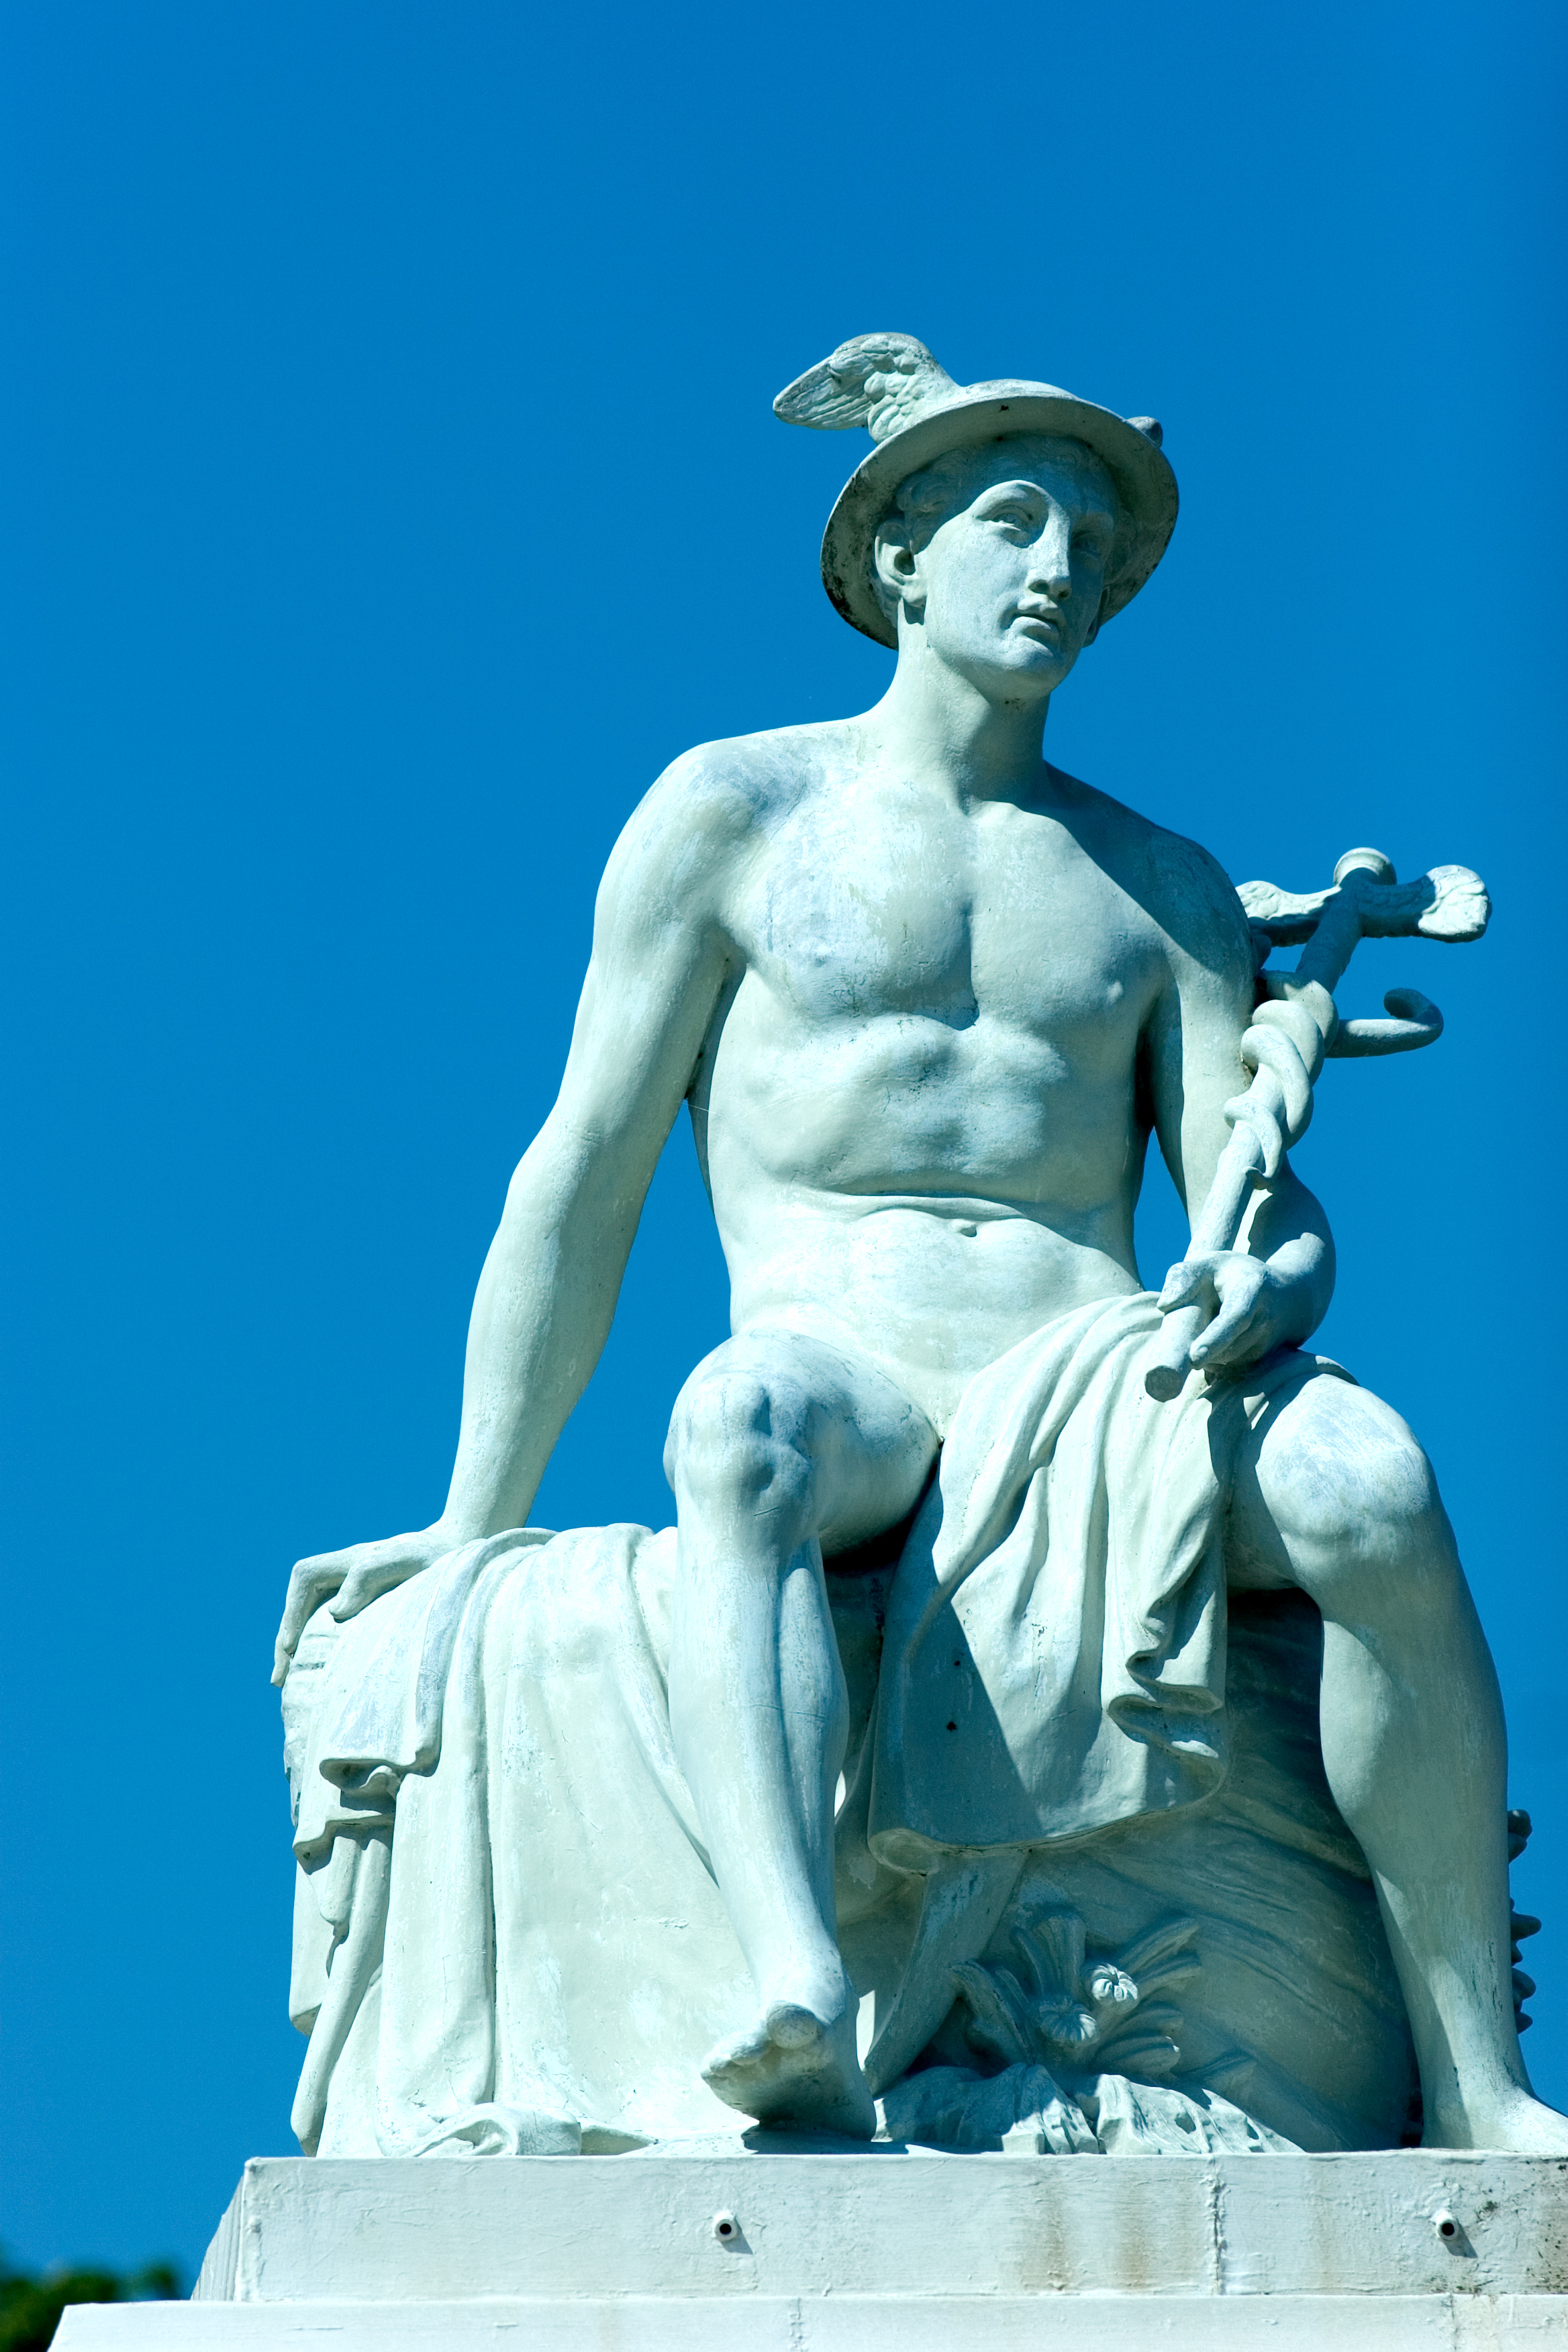 The Greek God, Hermes, is often depicted with the cadaceous.